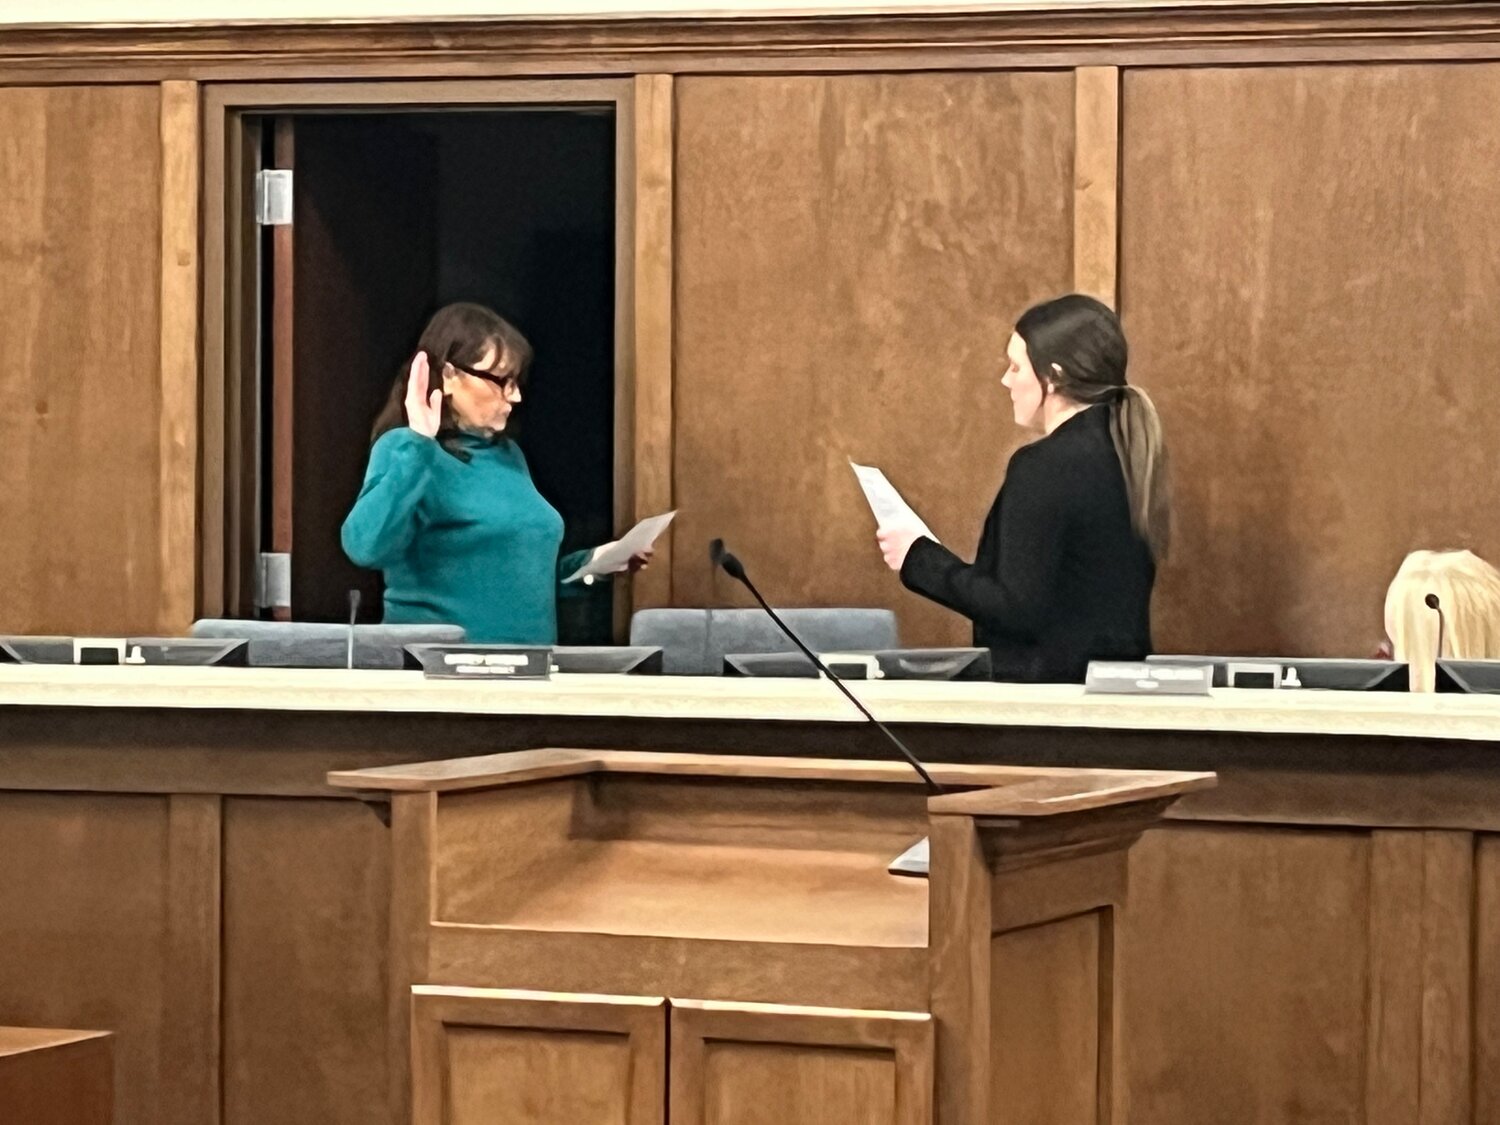 Wright City Ward 2 Alderwoman Kim Arbuthnot takes her oath of office from City Clerk Abbie Ogborn during the April 27 board of aldermen meeting.